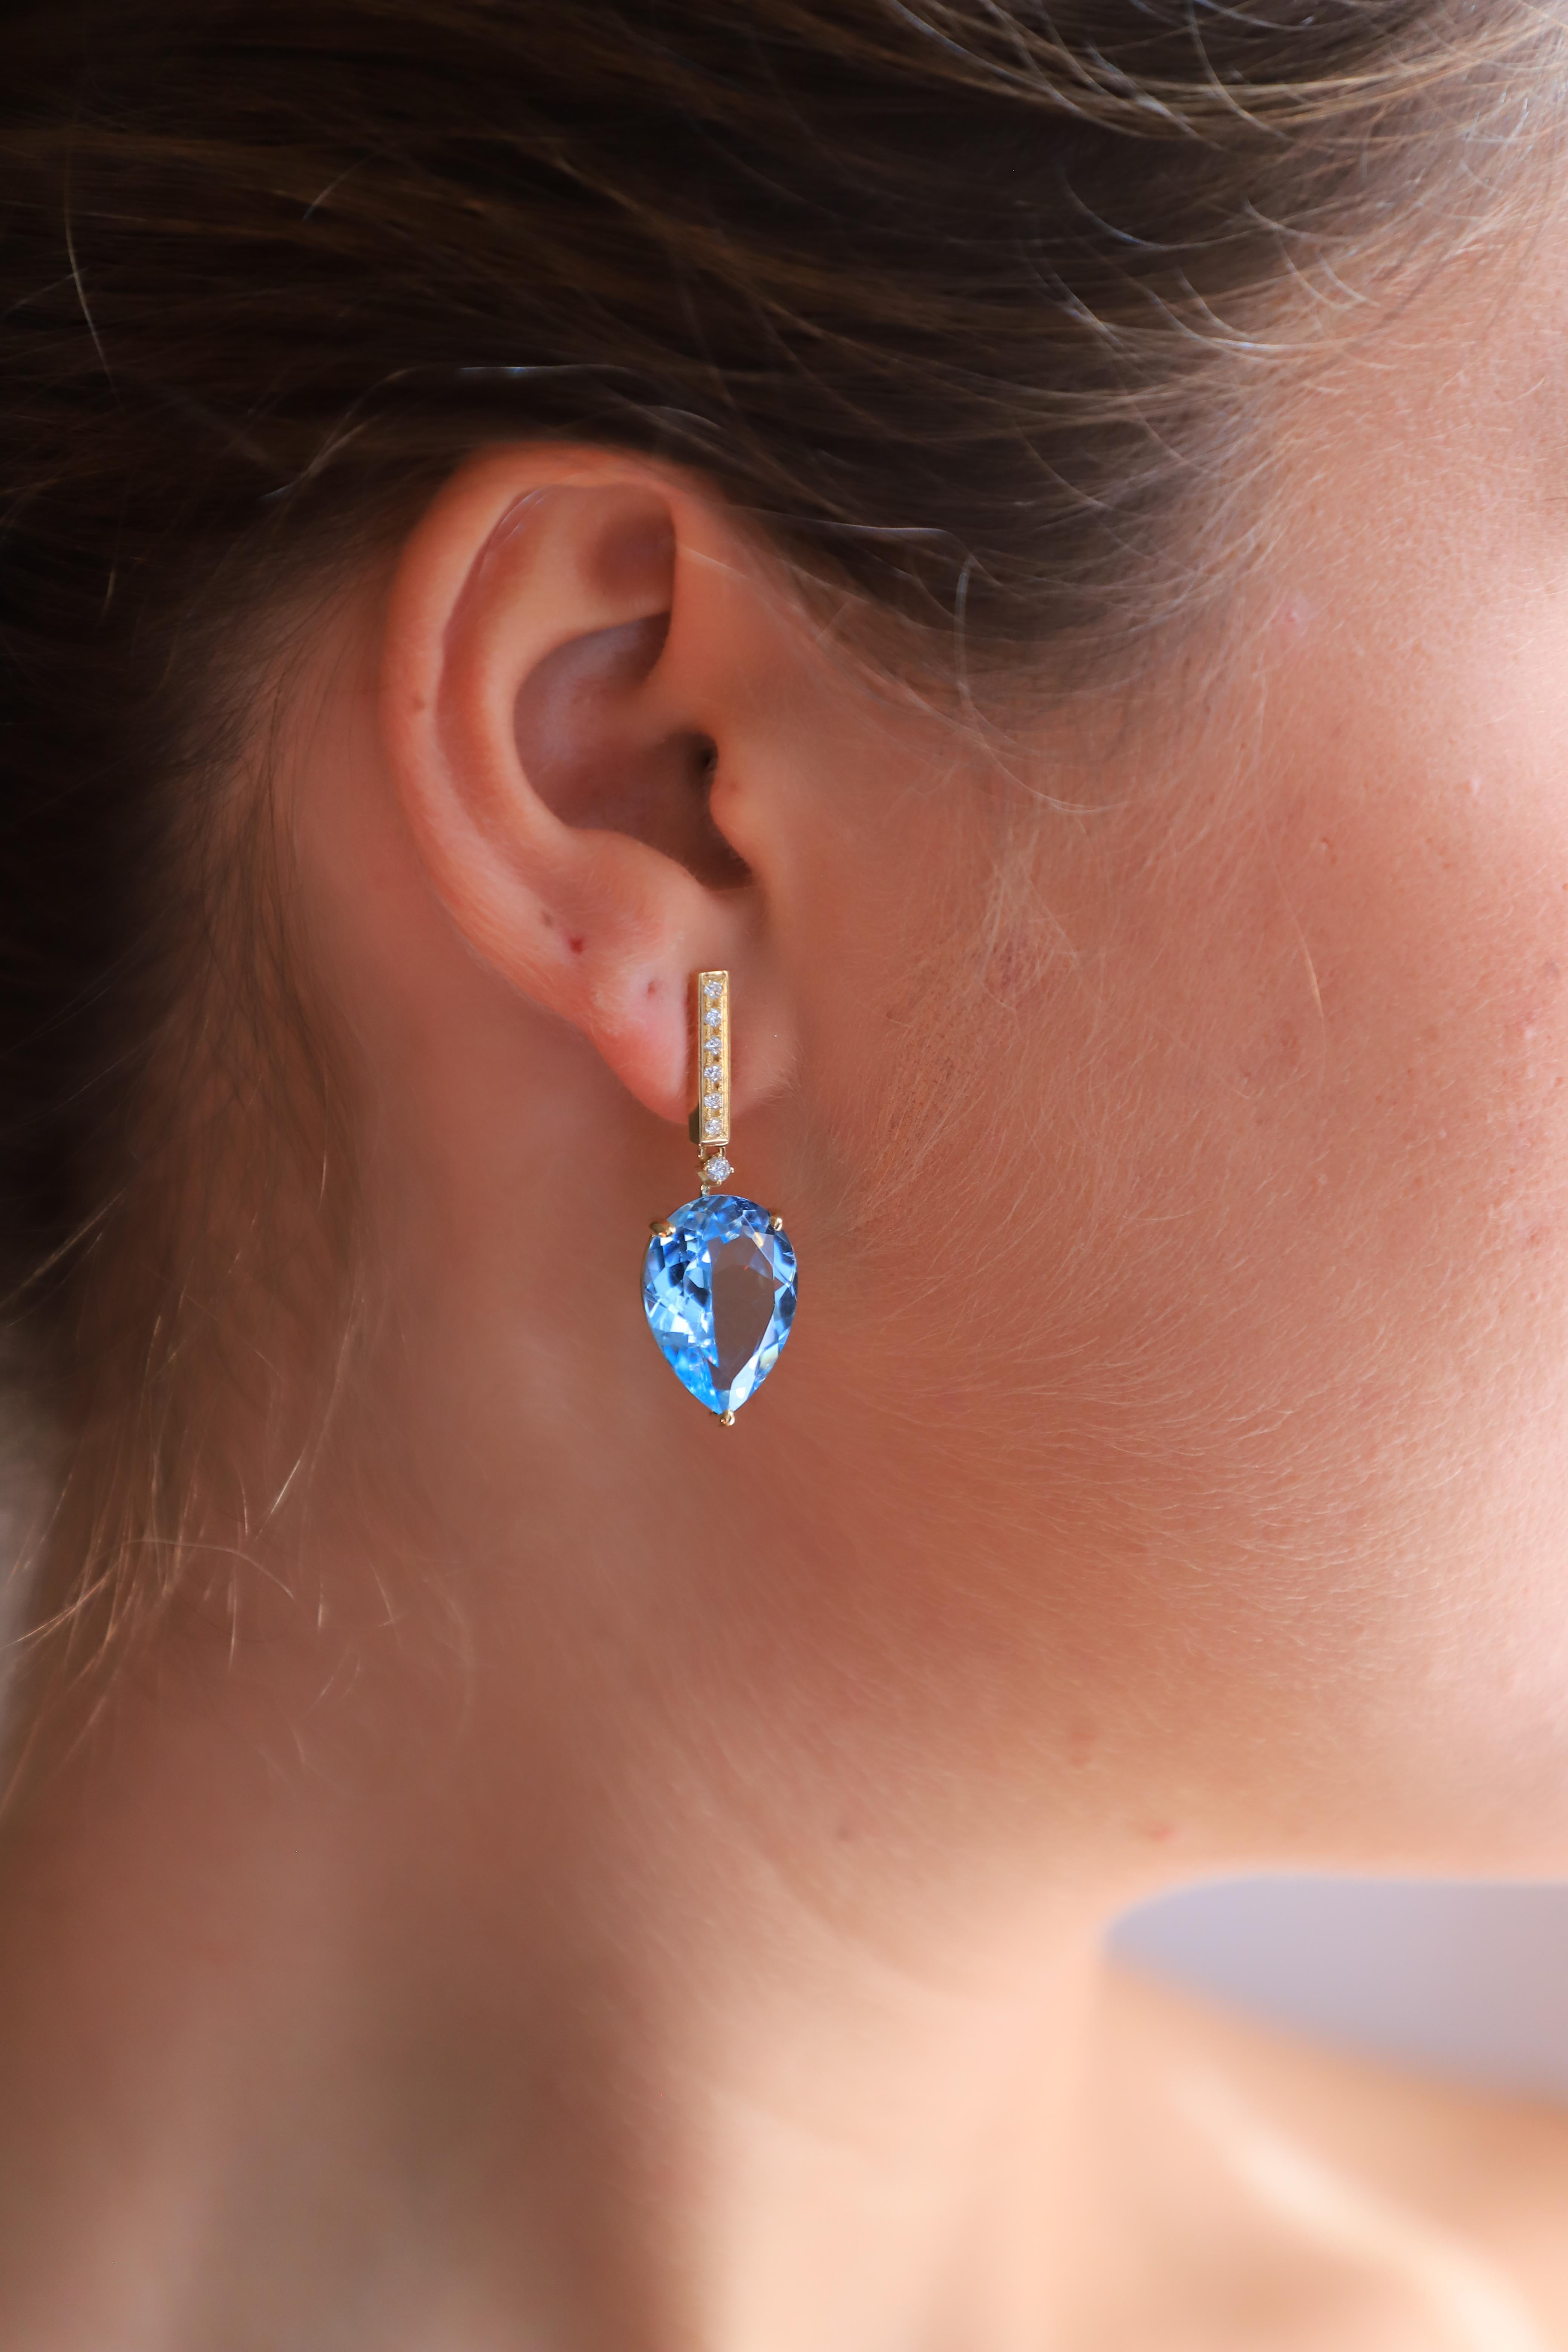 Introducing our exquisite Limited Edition By Rossella Ugolini Design, Art Deco Style Bold Dangle Earrings.
A captivating fusion of 18 Karat Yellow Gold, Blue Topaz, and 0.12 Carats White Diamonds. 
These earrings are a true statement piece, designed